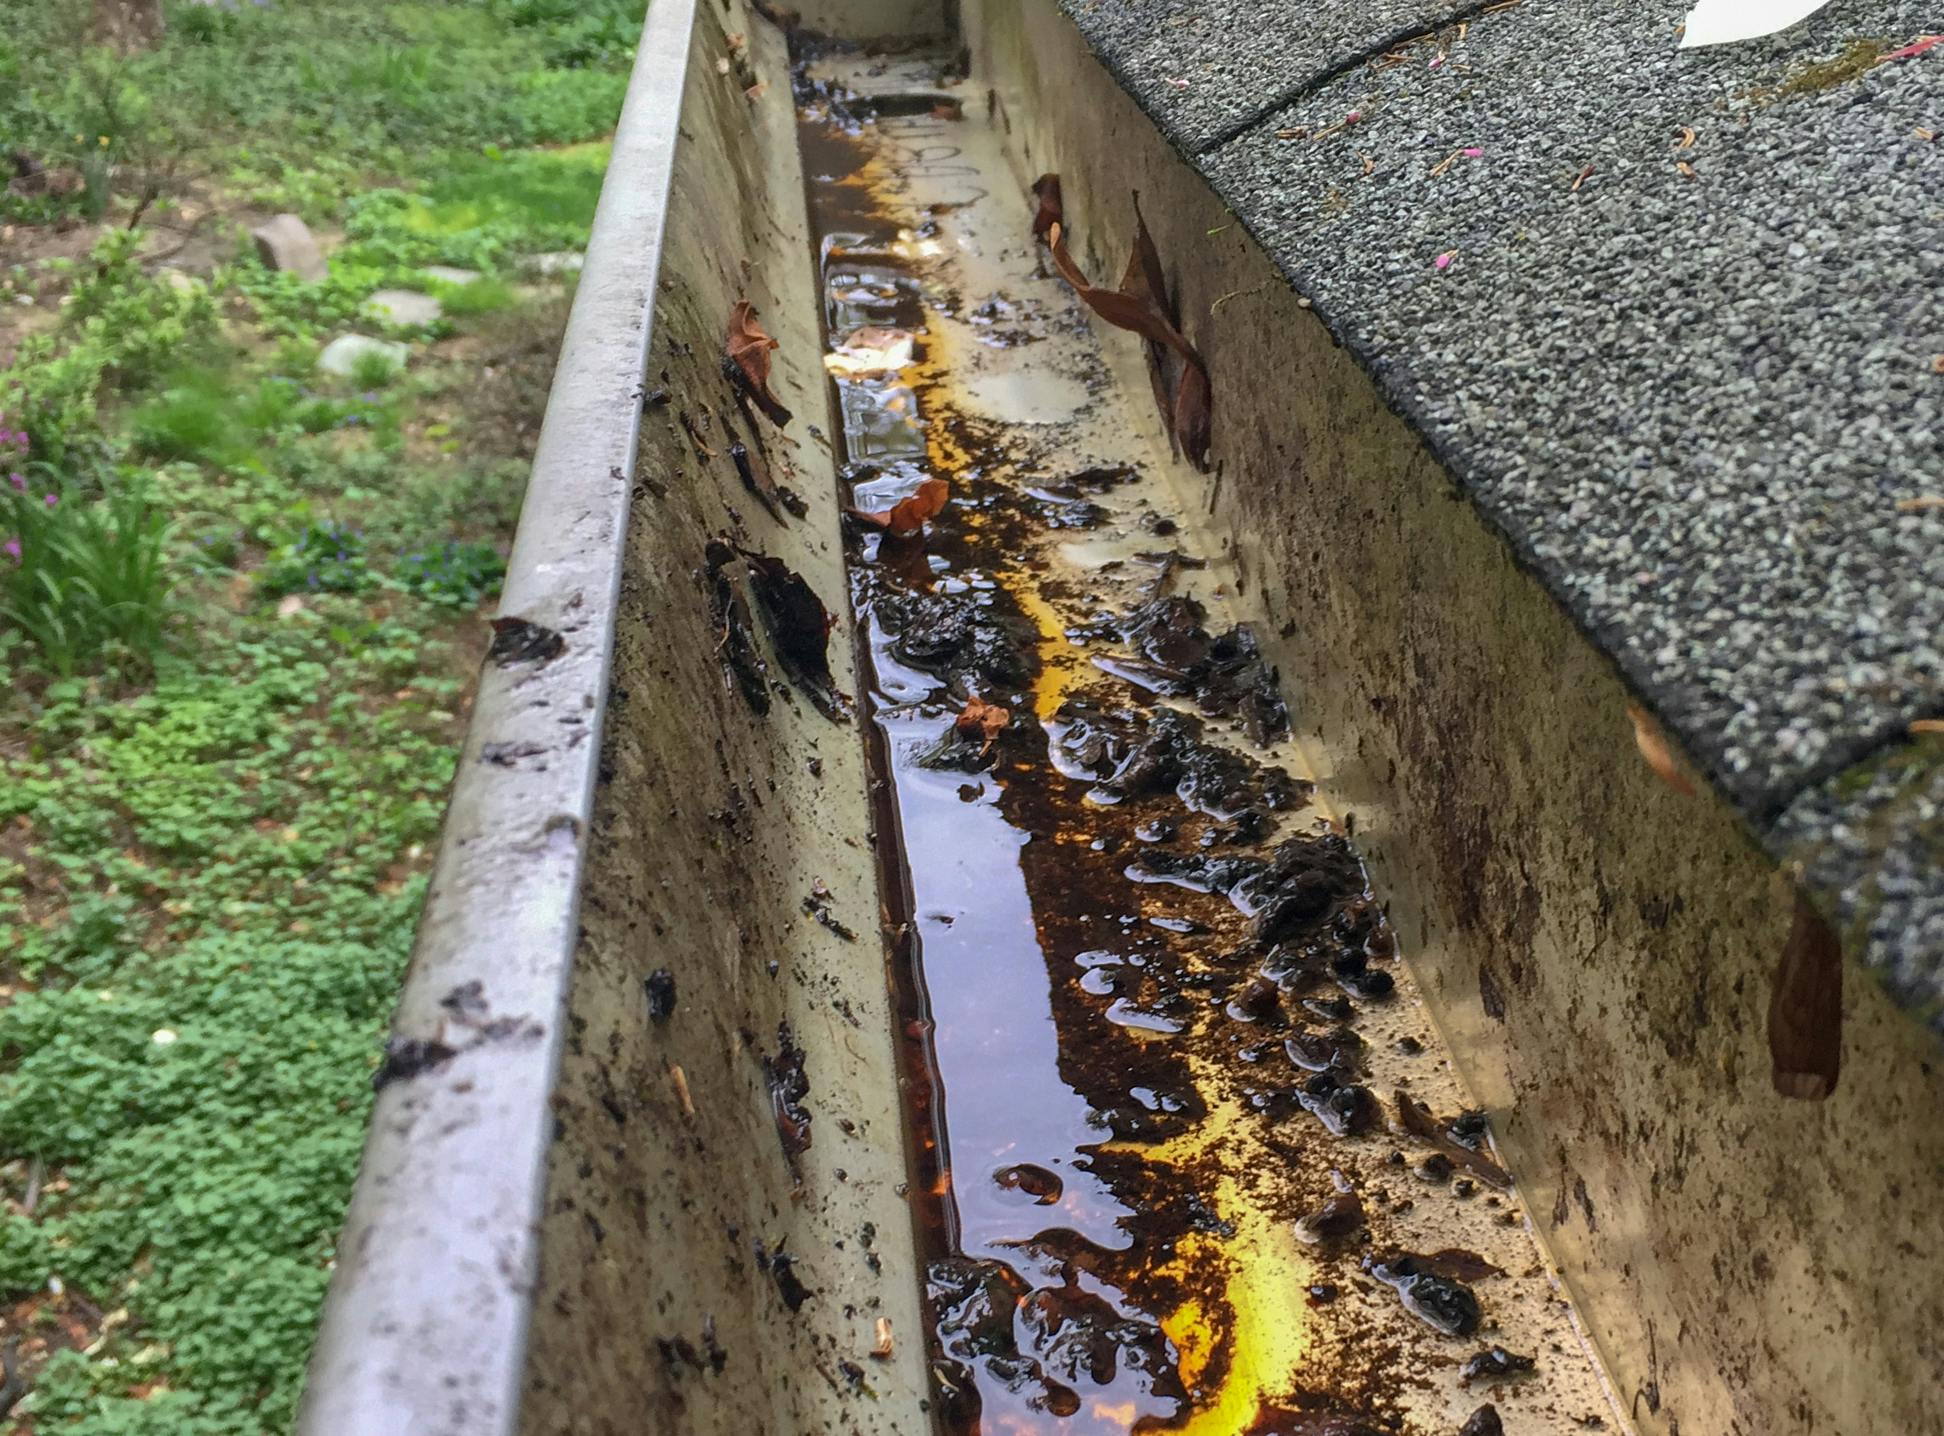 Stagnant water in gutters